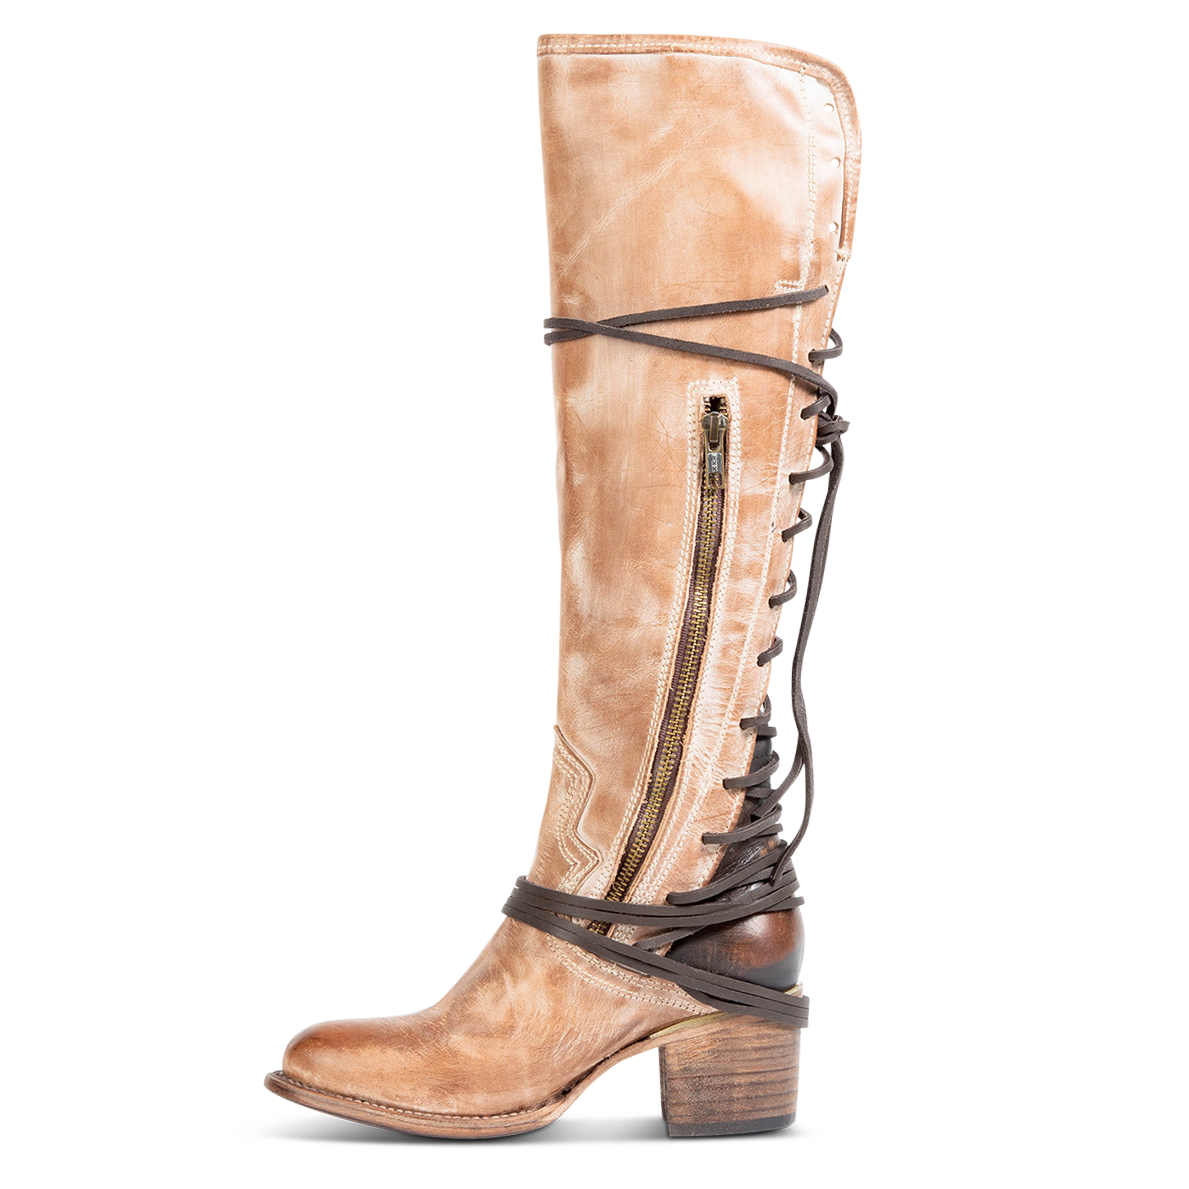 Inside view showing working brass zip closure and adjustable wrap around laces on FREEBIRD by Steven women's Coal taupe tall boot